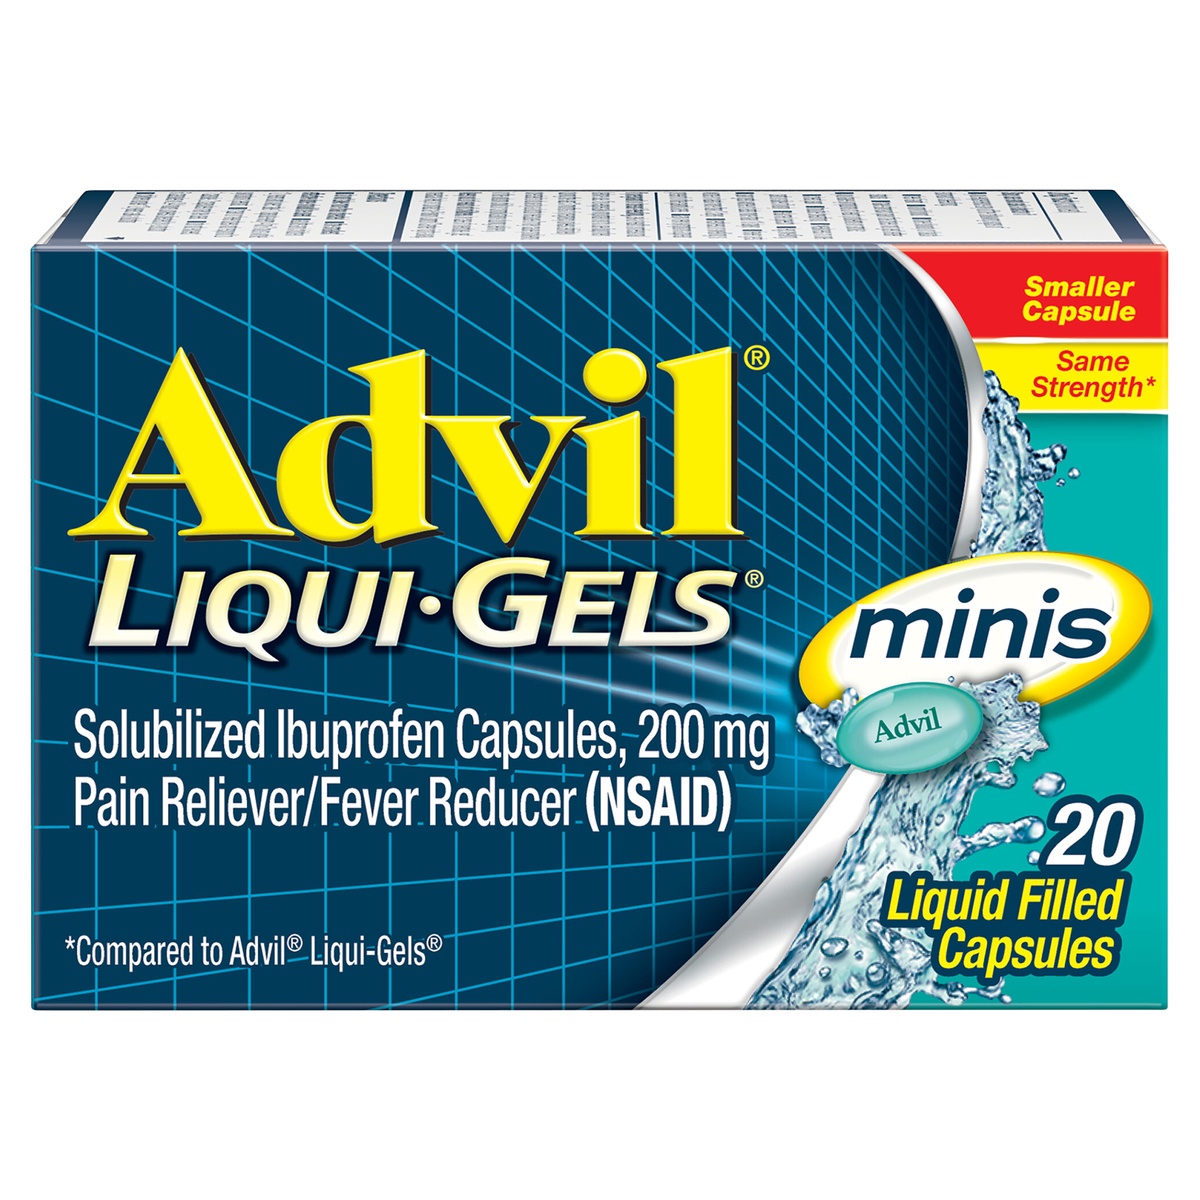 slide 10 of 10, Advil Liqui-Gels minis Pain Reliever and Fever Reducer, Ibuprofen 200mg for Pain Relief - 20 Liquid Filled Capsules, 20 ct